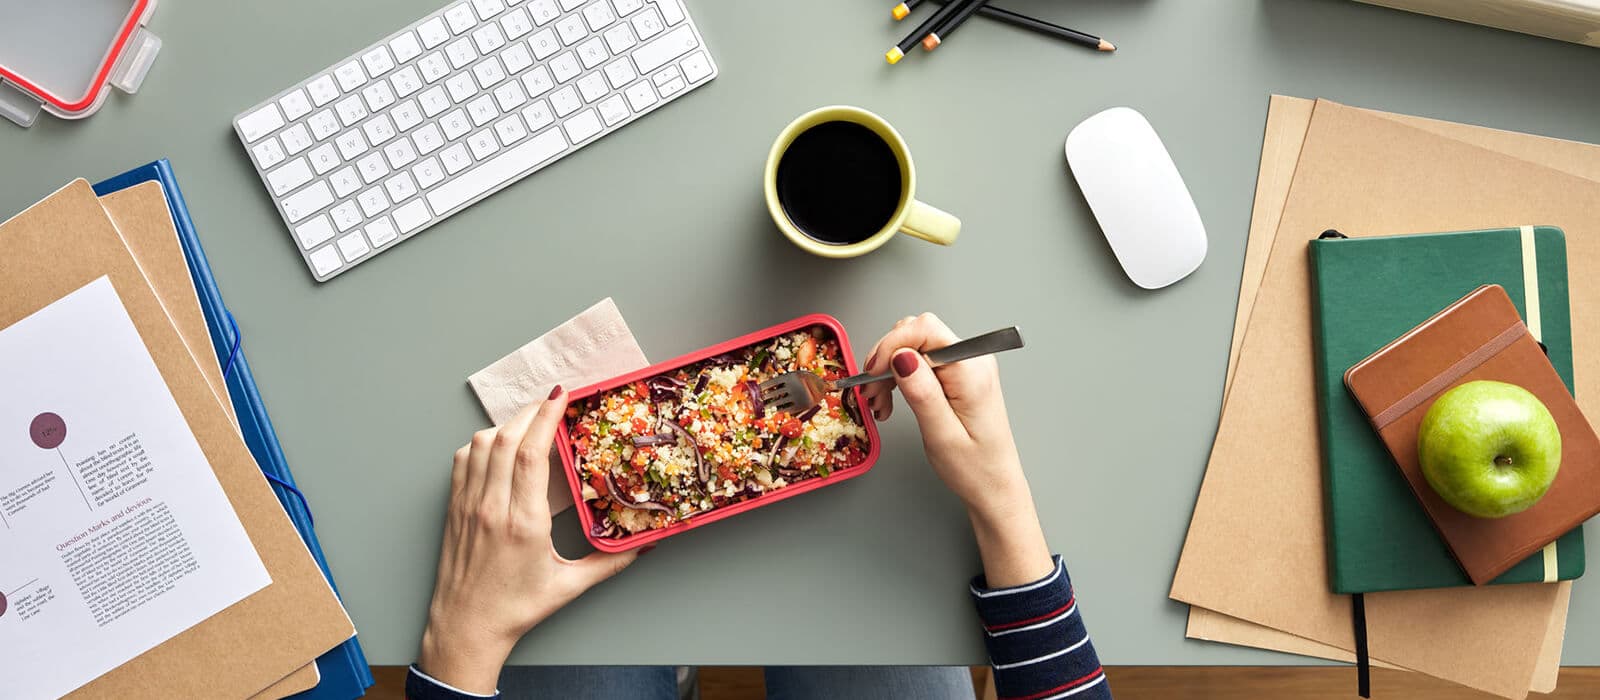 How to Make Healthy Eating Part of Your Workday